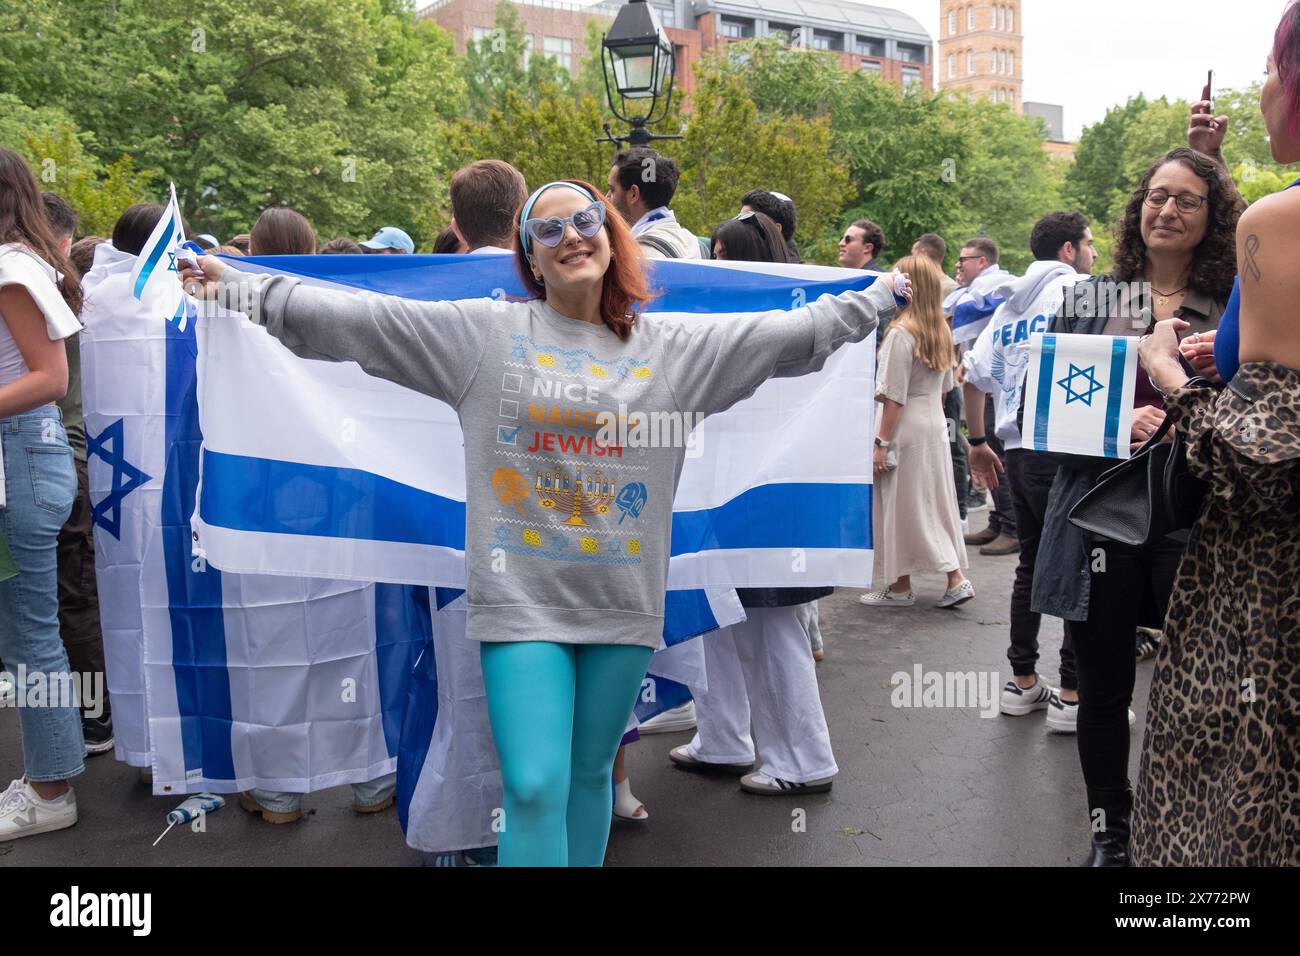 During a pro Israel rally in Washington Square PArk a proud Jewish girl poses with an Israeli flag. Stock Photo